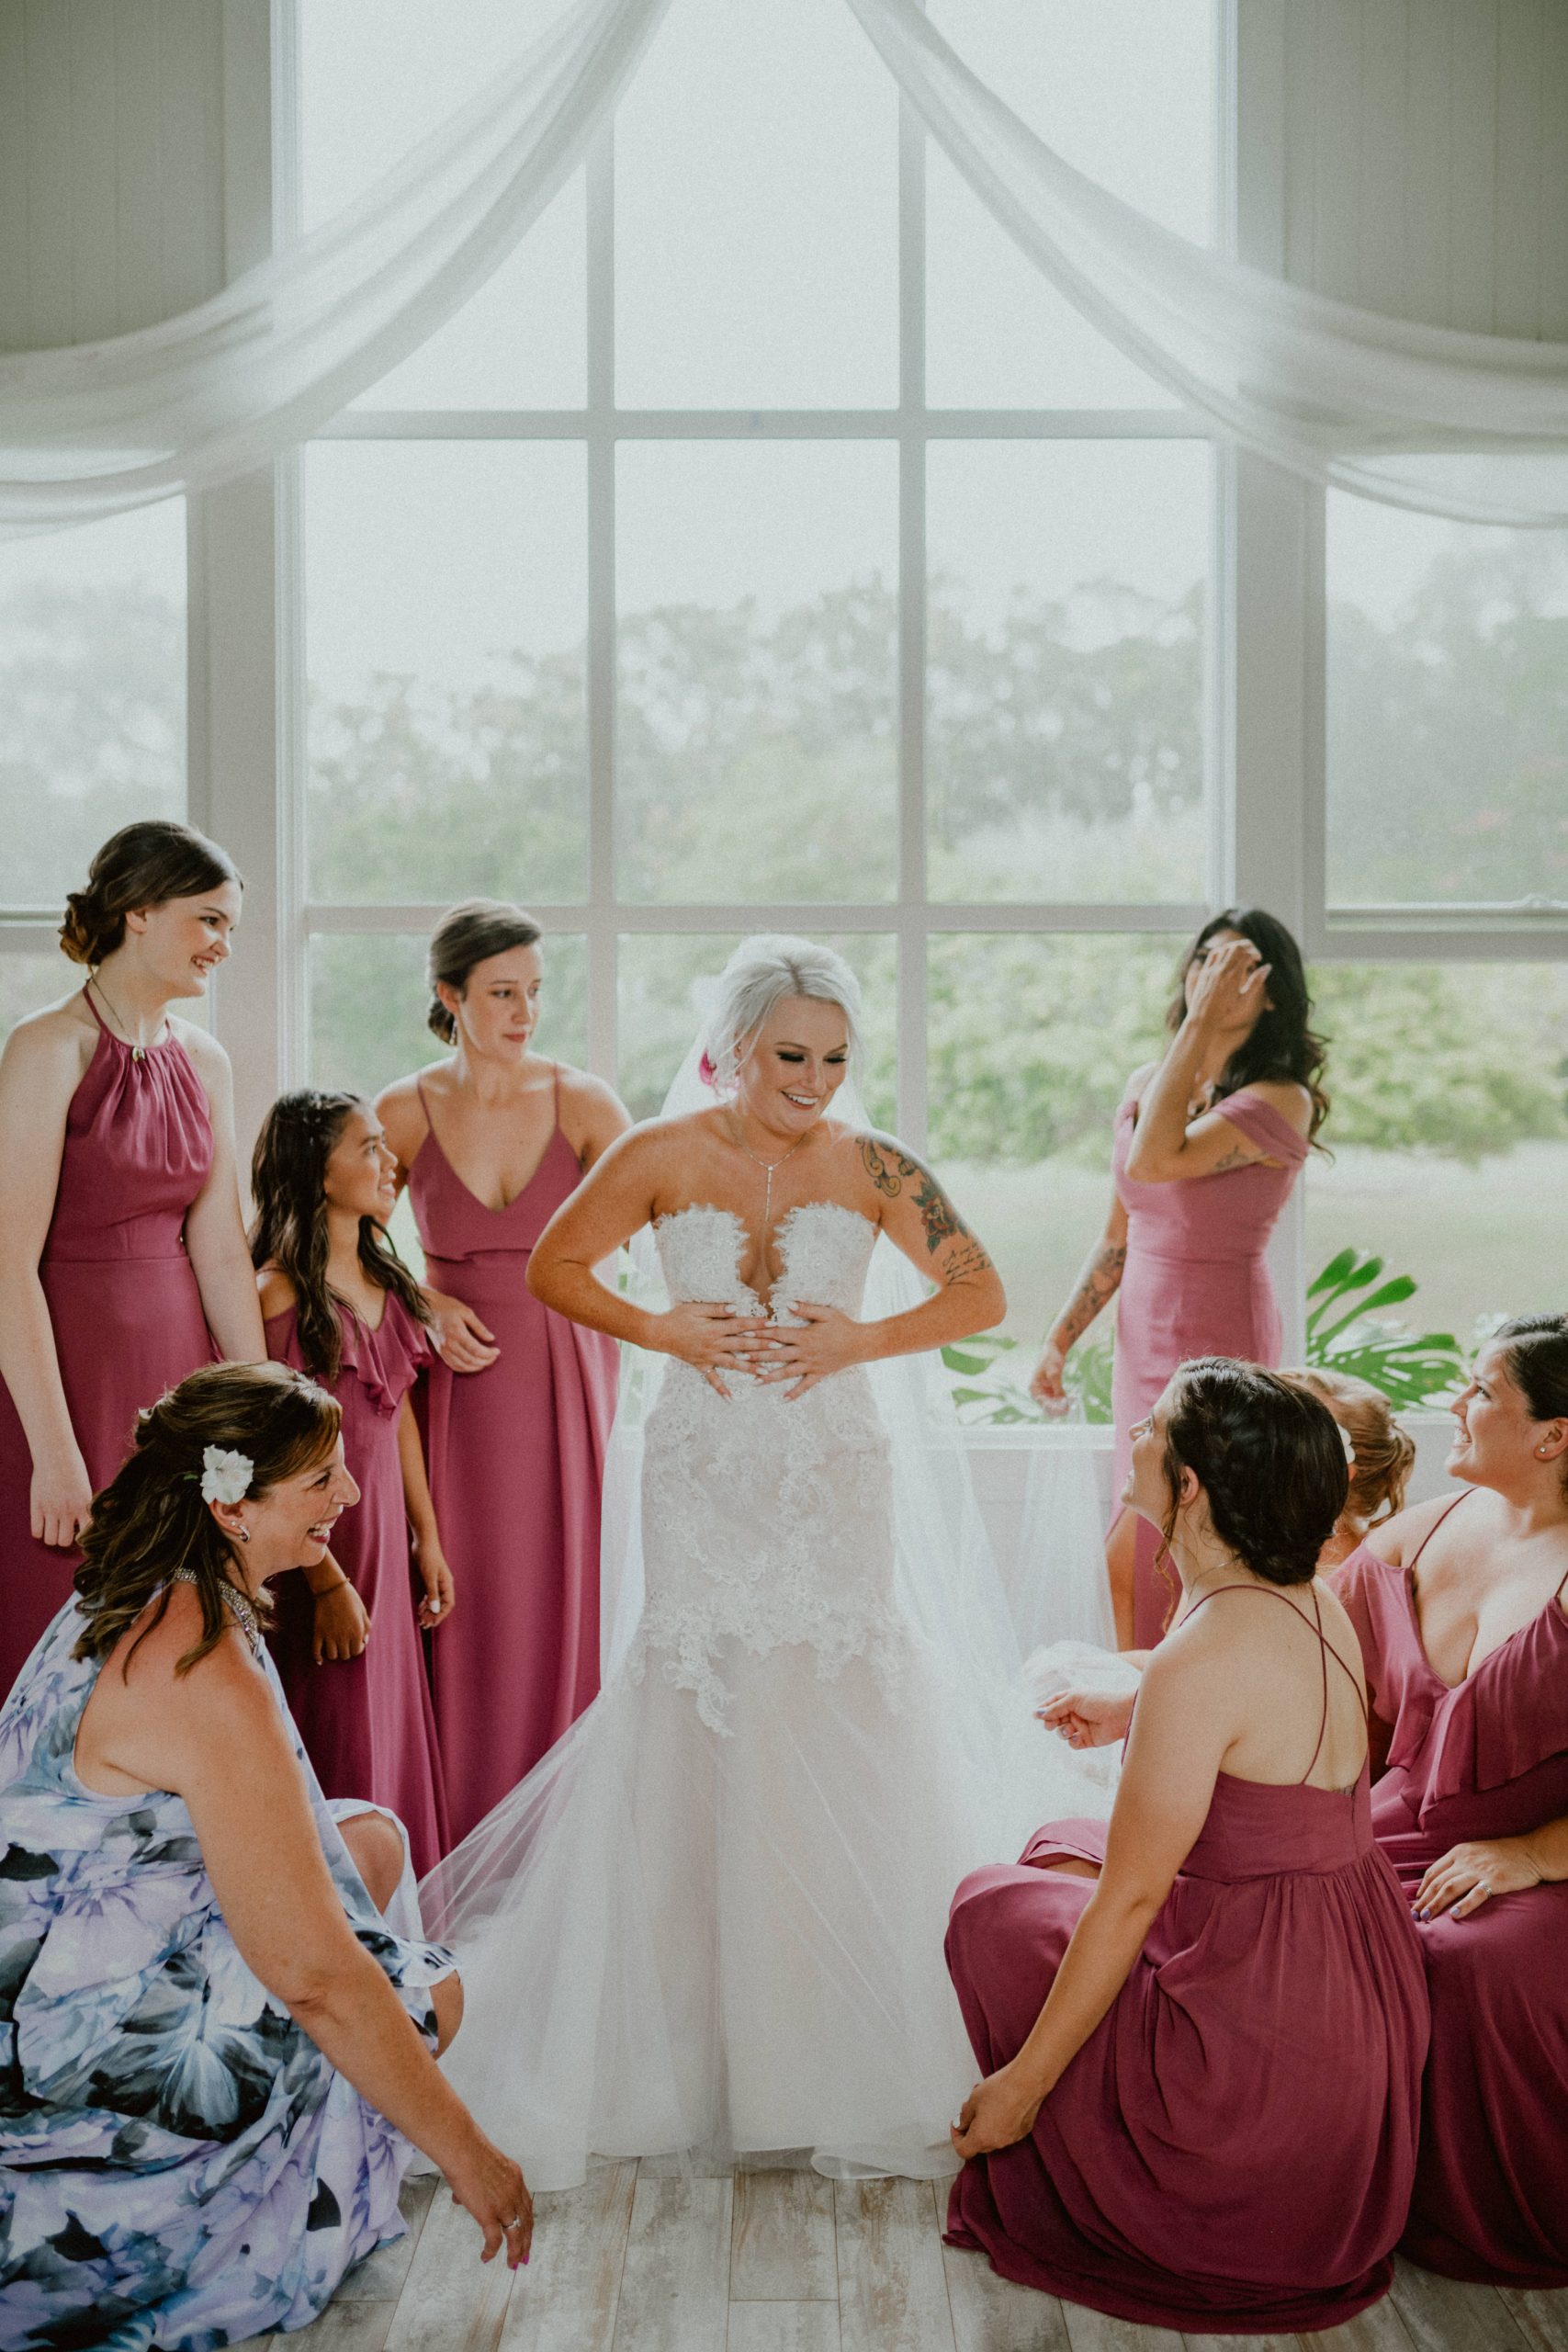 Bride and her bridal party stand in front of large window looking out at Hawaiian Landscape. Bride stands with a mermaid style strapless dress and long tulle dress surrounded by bridesmaids wearing different shades of pink bridesmaid dresses | Oahu Wedding Photographer, Oahu Elopement Photographer, Destination Wedding Photographer, Destination Elopement Photographer, Newlywed moments ideas, Newlywed Photography inspiration, Hawaii Elopement ideas | chelseaabril.com